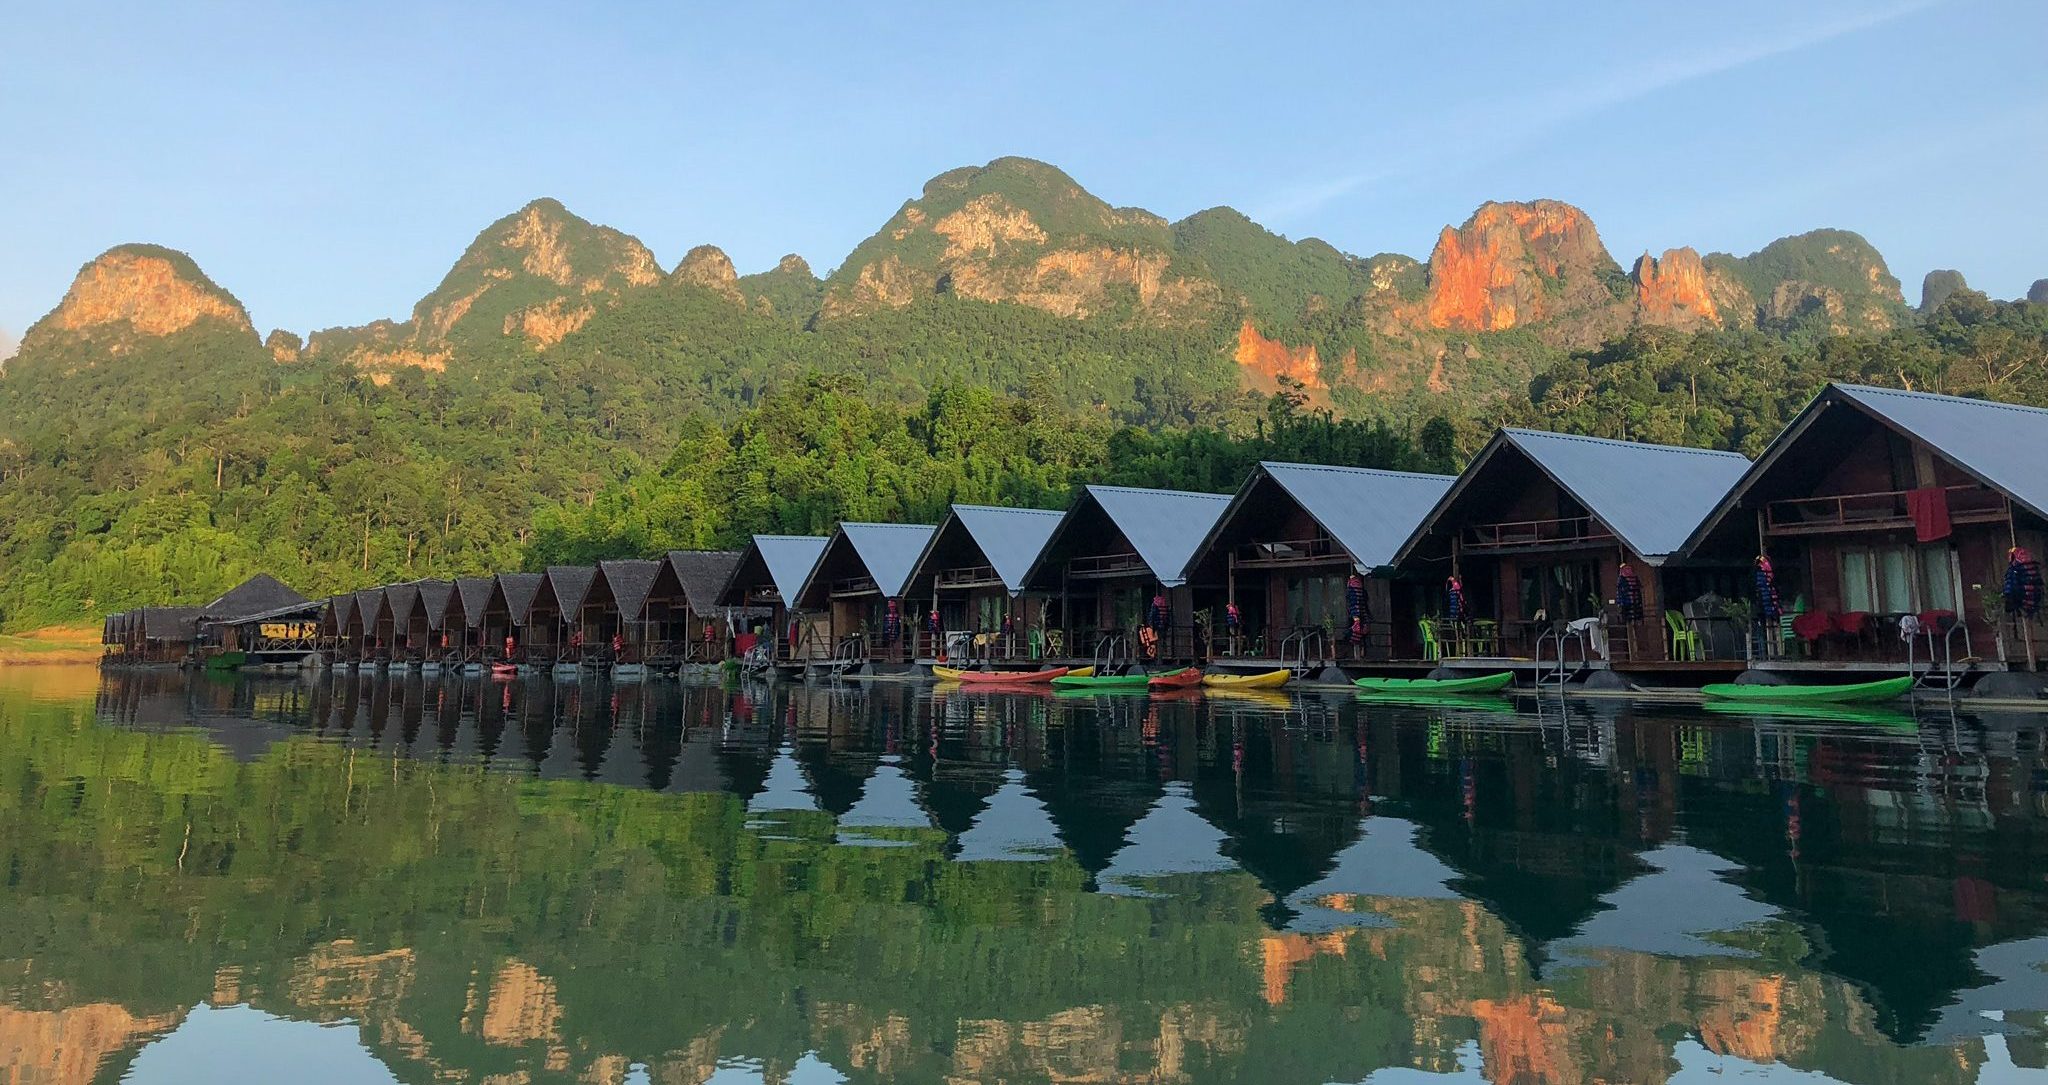 Stay Overnight in a Khao Sok National Park Floating Bungalow